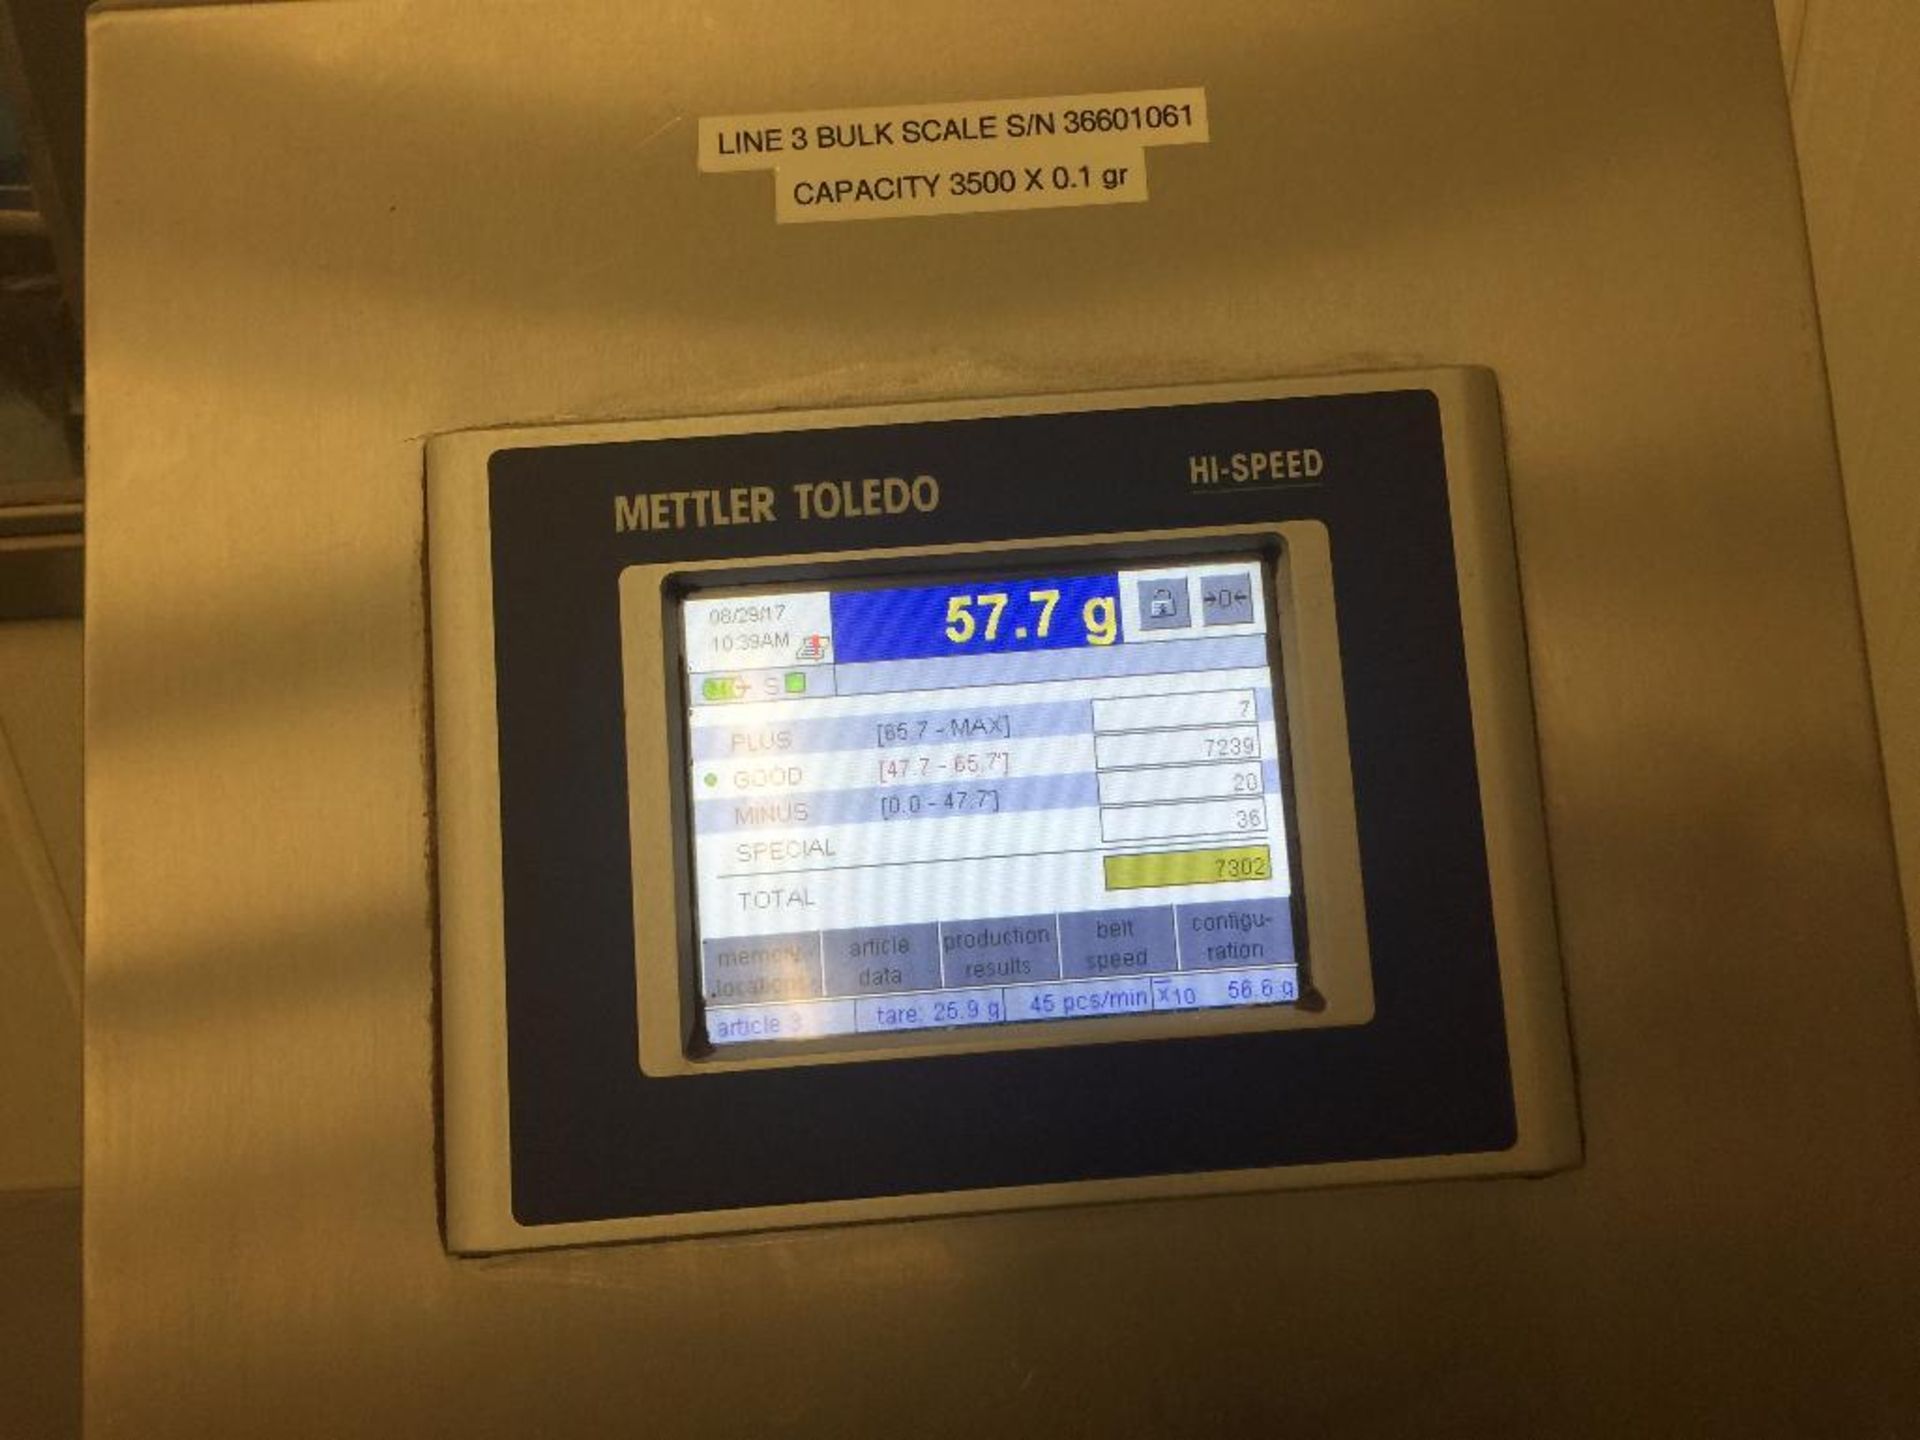 Mettler Toledo high speed checkweigher, s/n 36601061, 3500 x 0.1 gr capacity, left to right with rej - Bild 4 aus 4